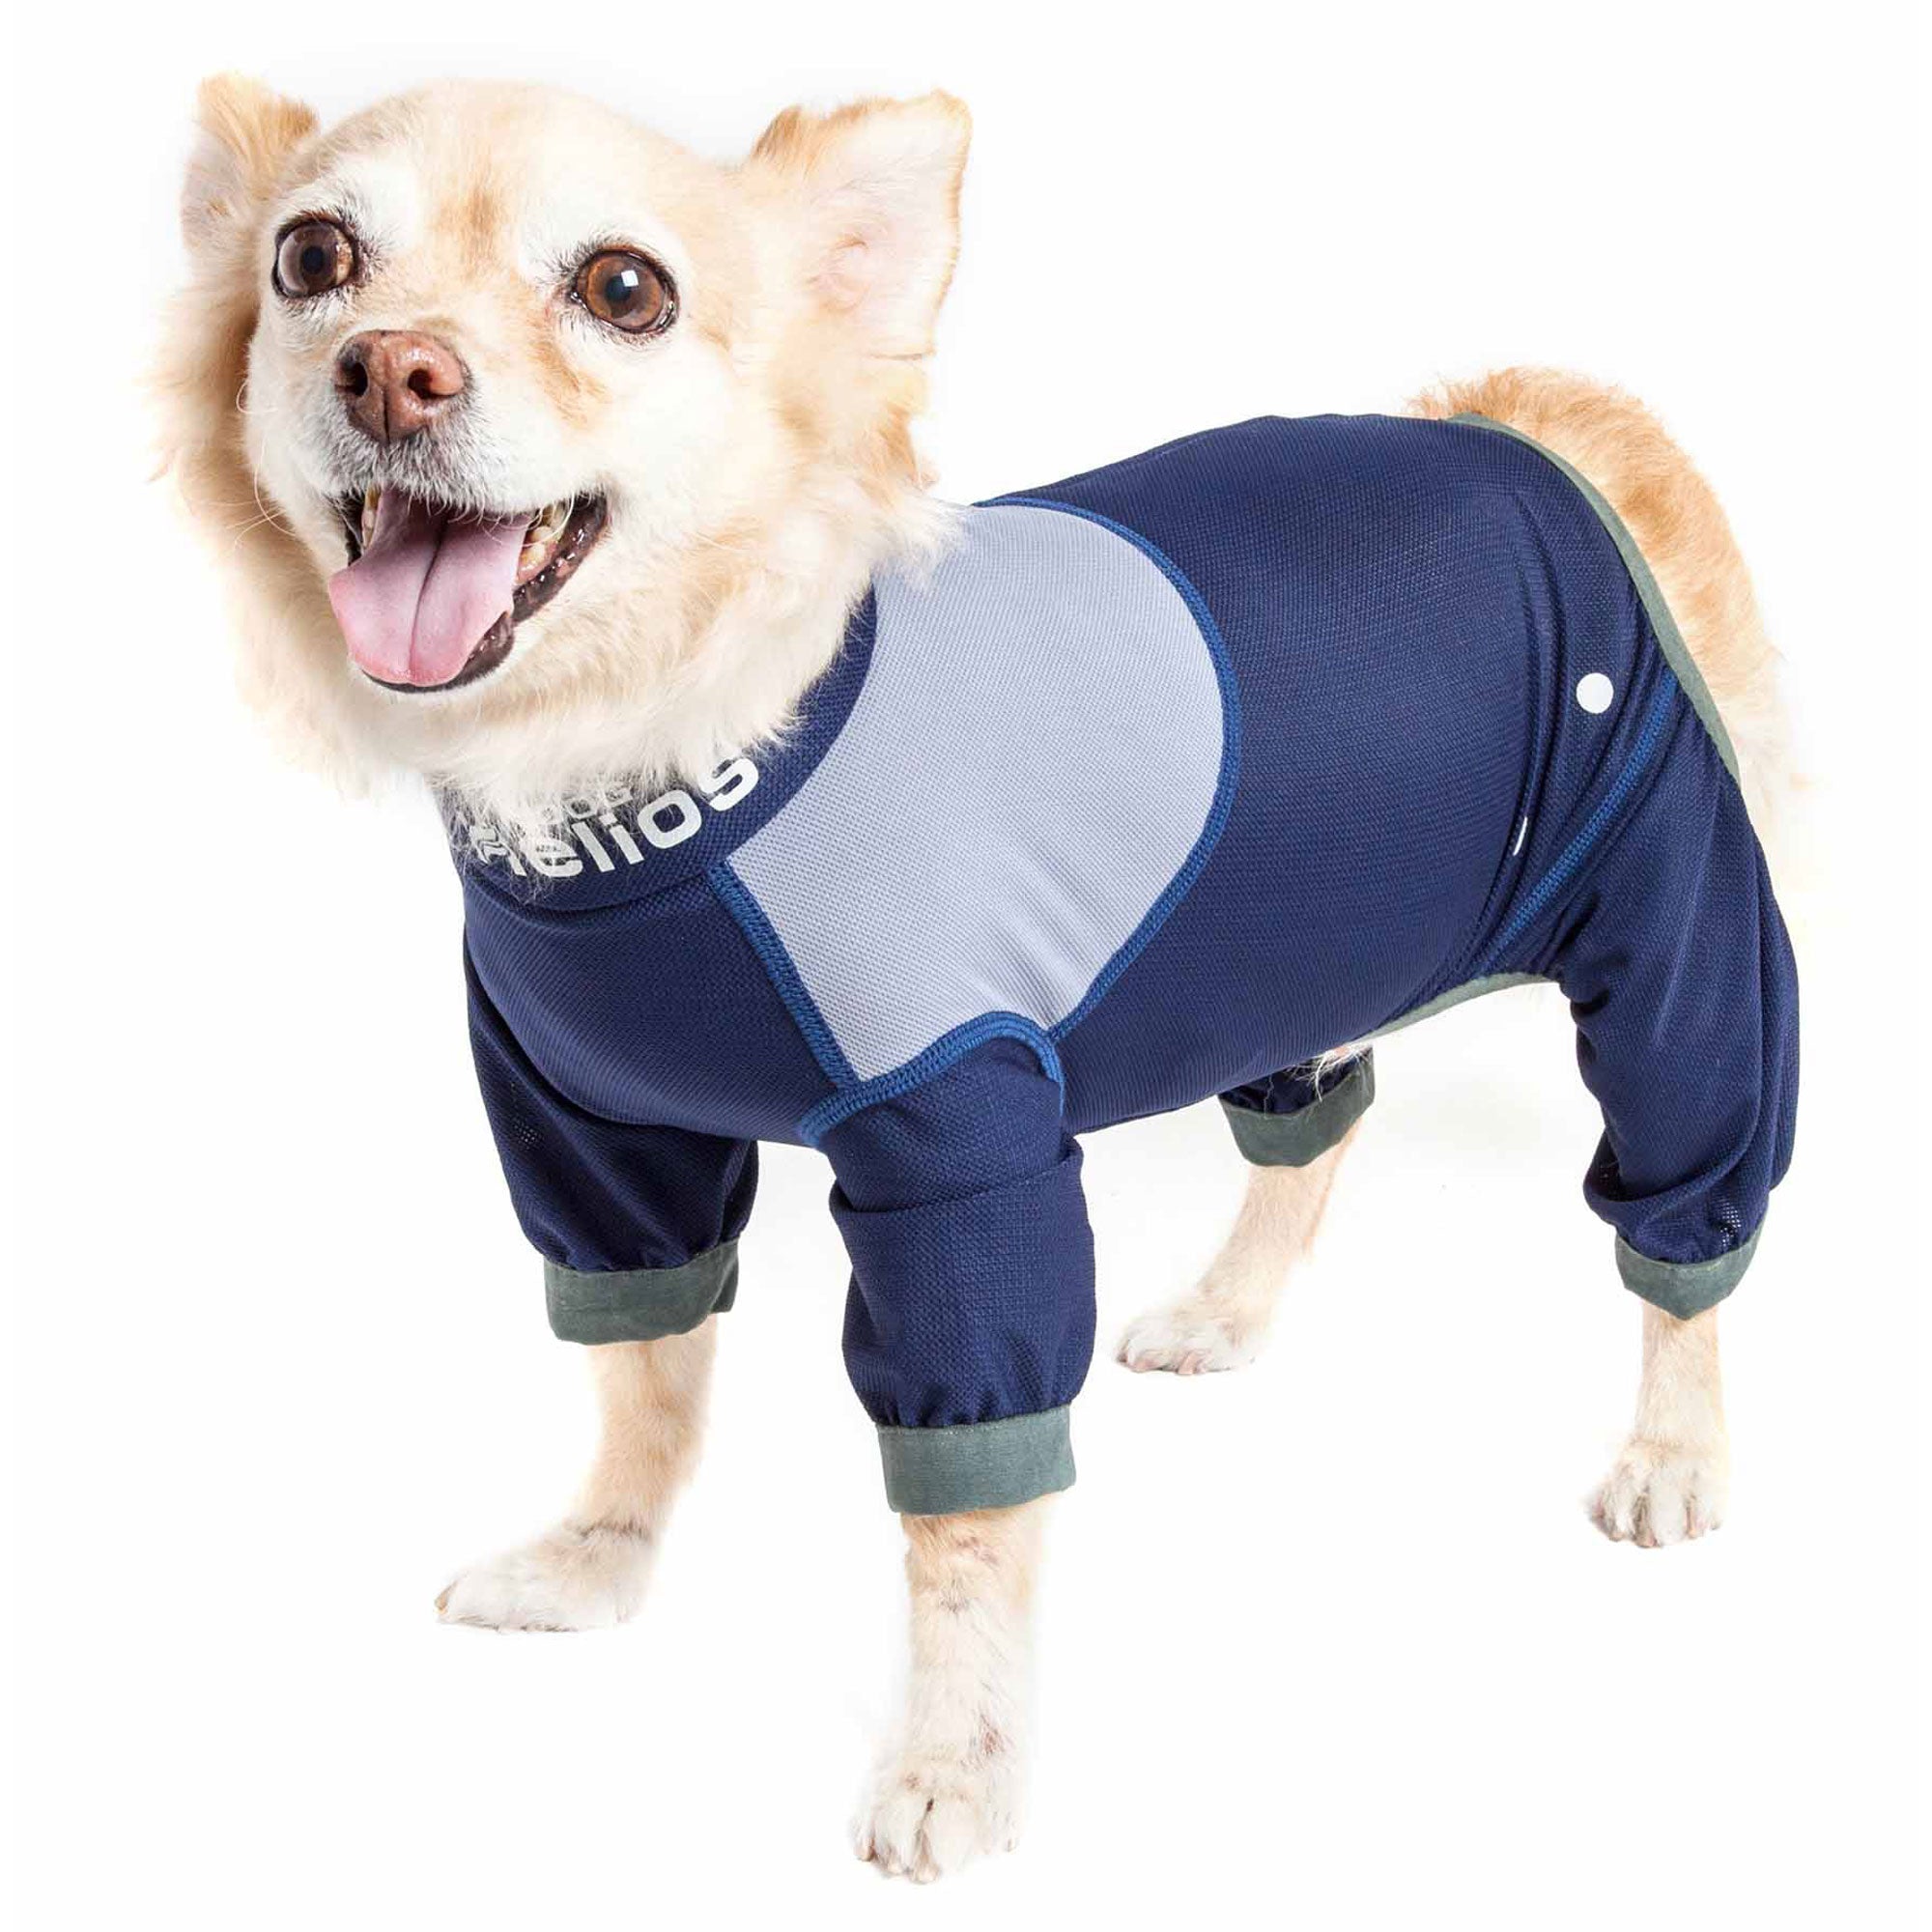 Dog Helios® Tail Runner Dog Track Suit - Blue & Gray - X-small